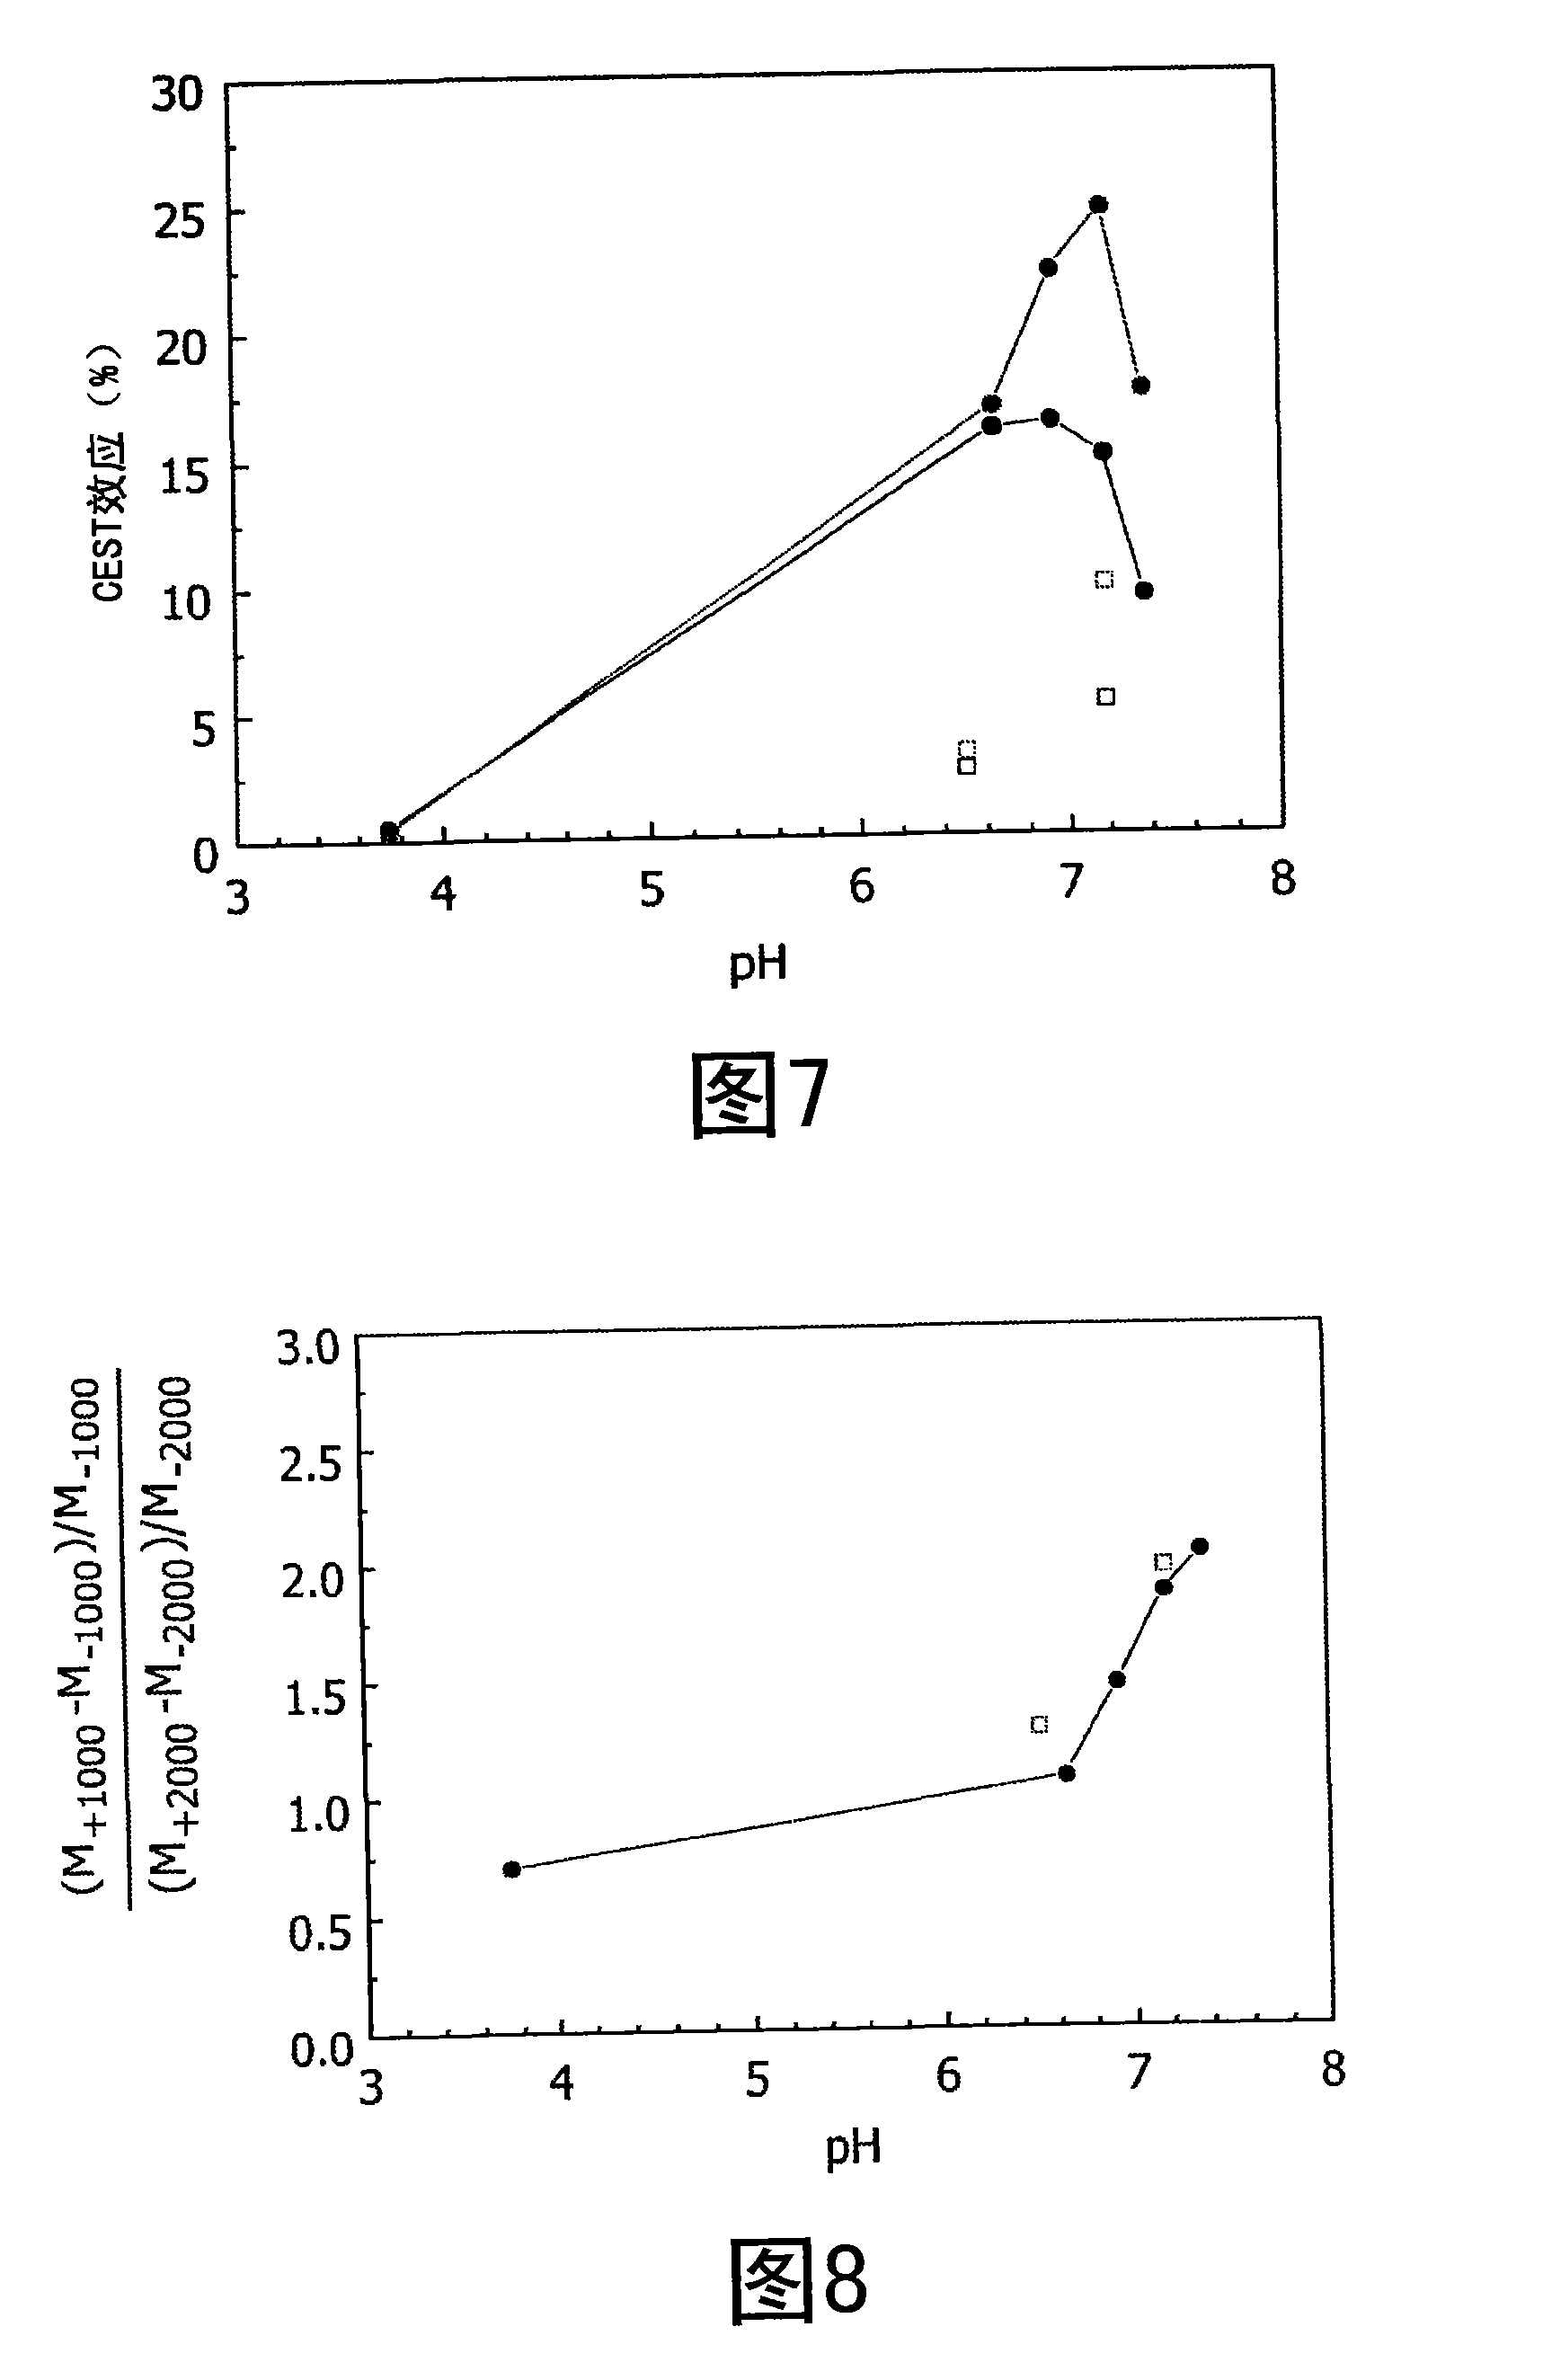 Method for using CEST contrast agents in MRI